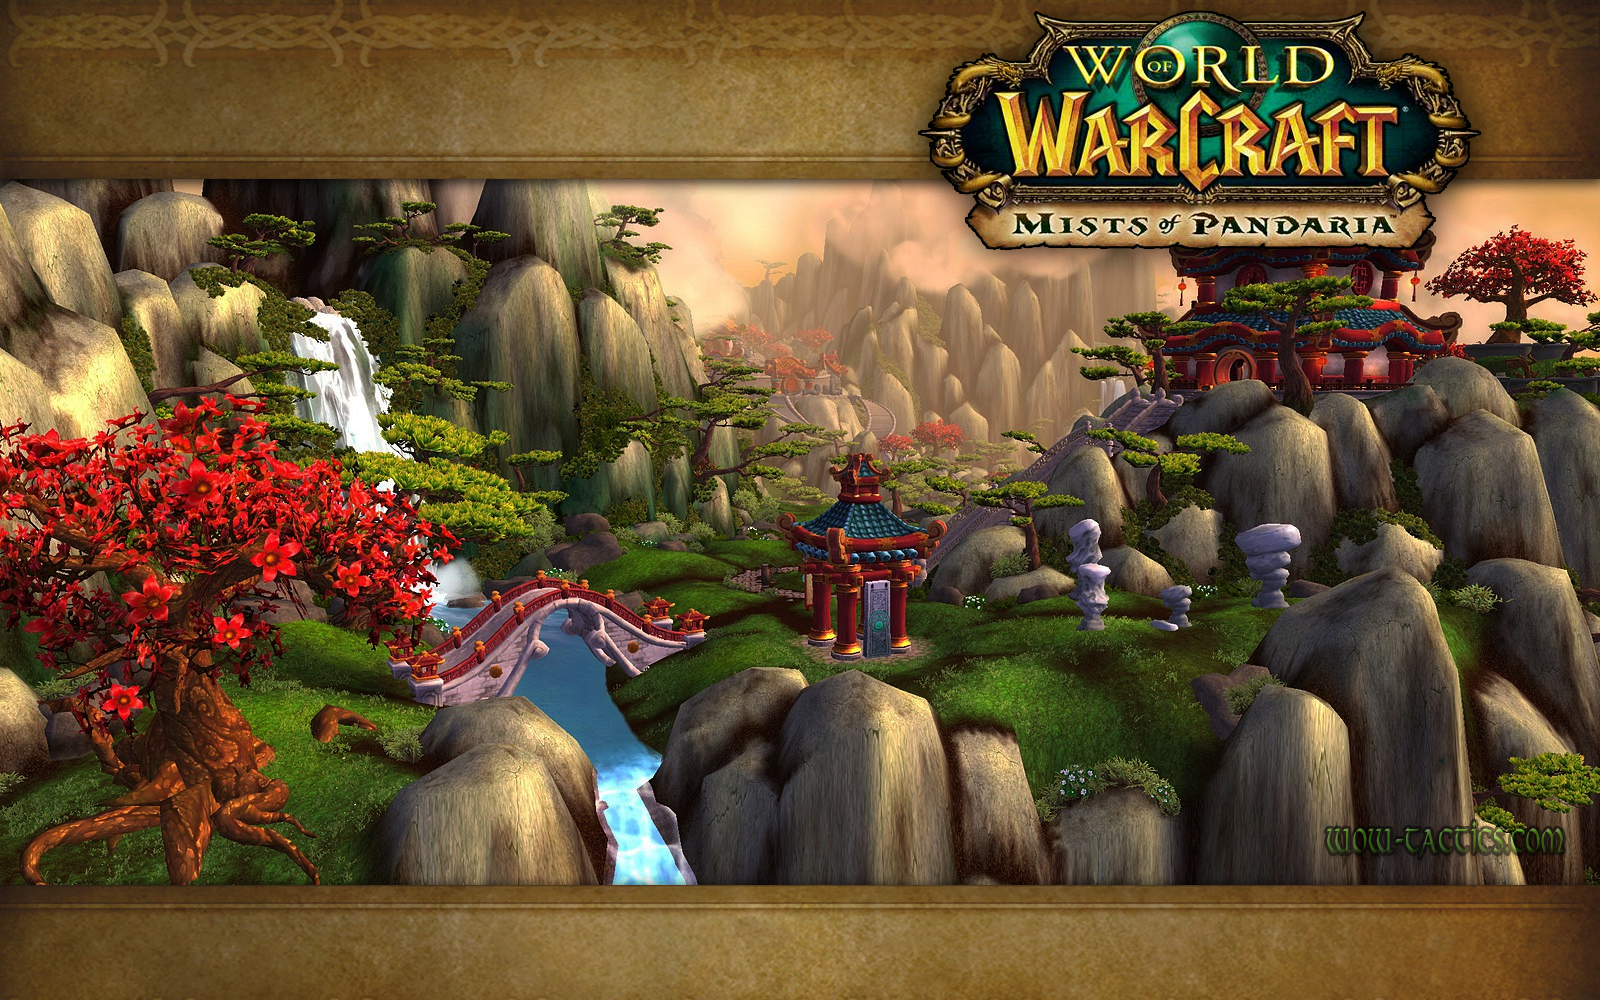 World Of Warcraft Mists Pandaria Wallpaper All Things Andy Gavin